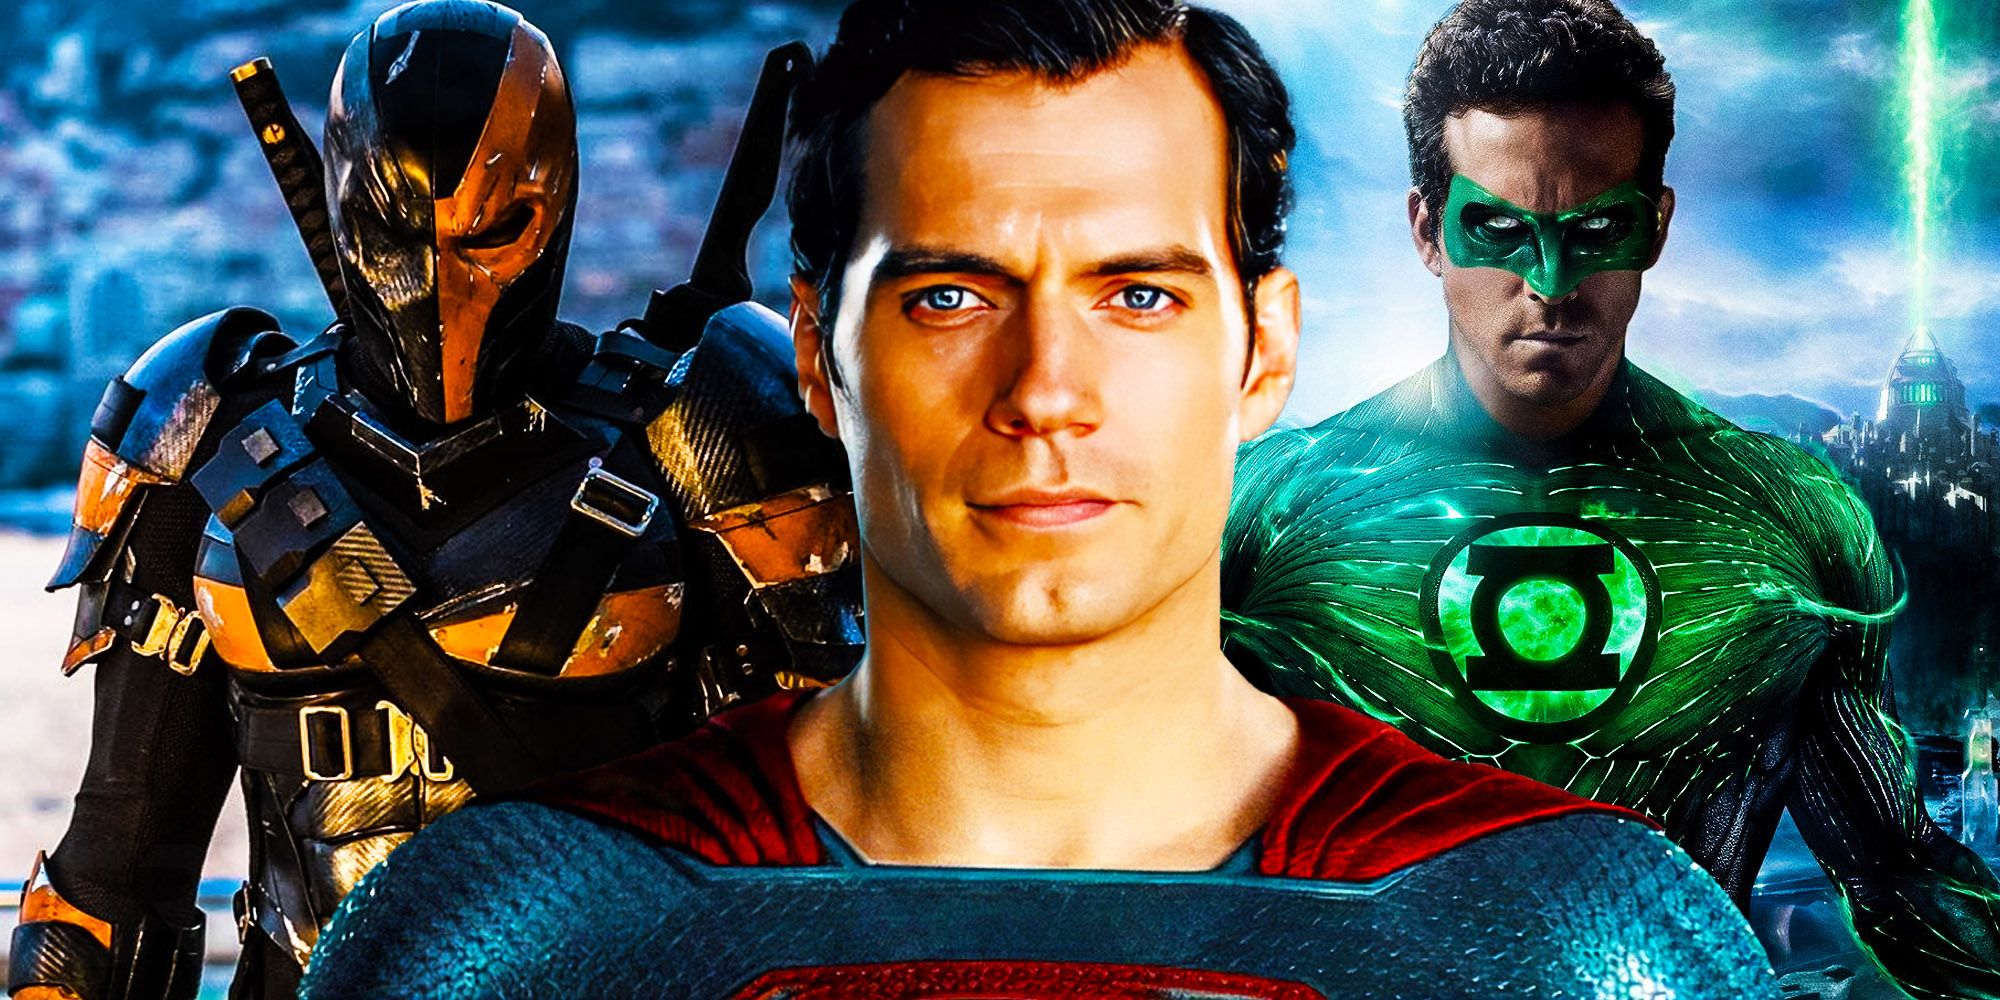 Will Henry Cavill play Superman again? The state of DC's superstar